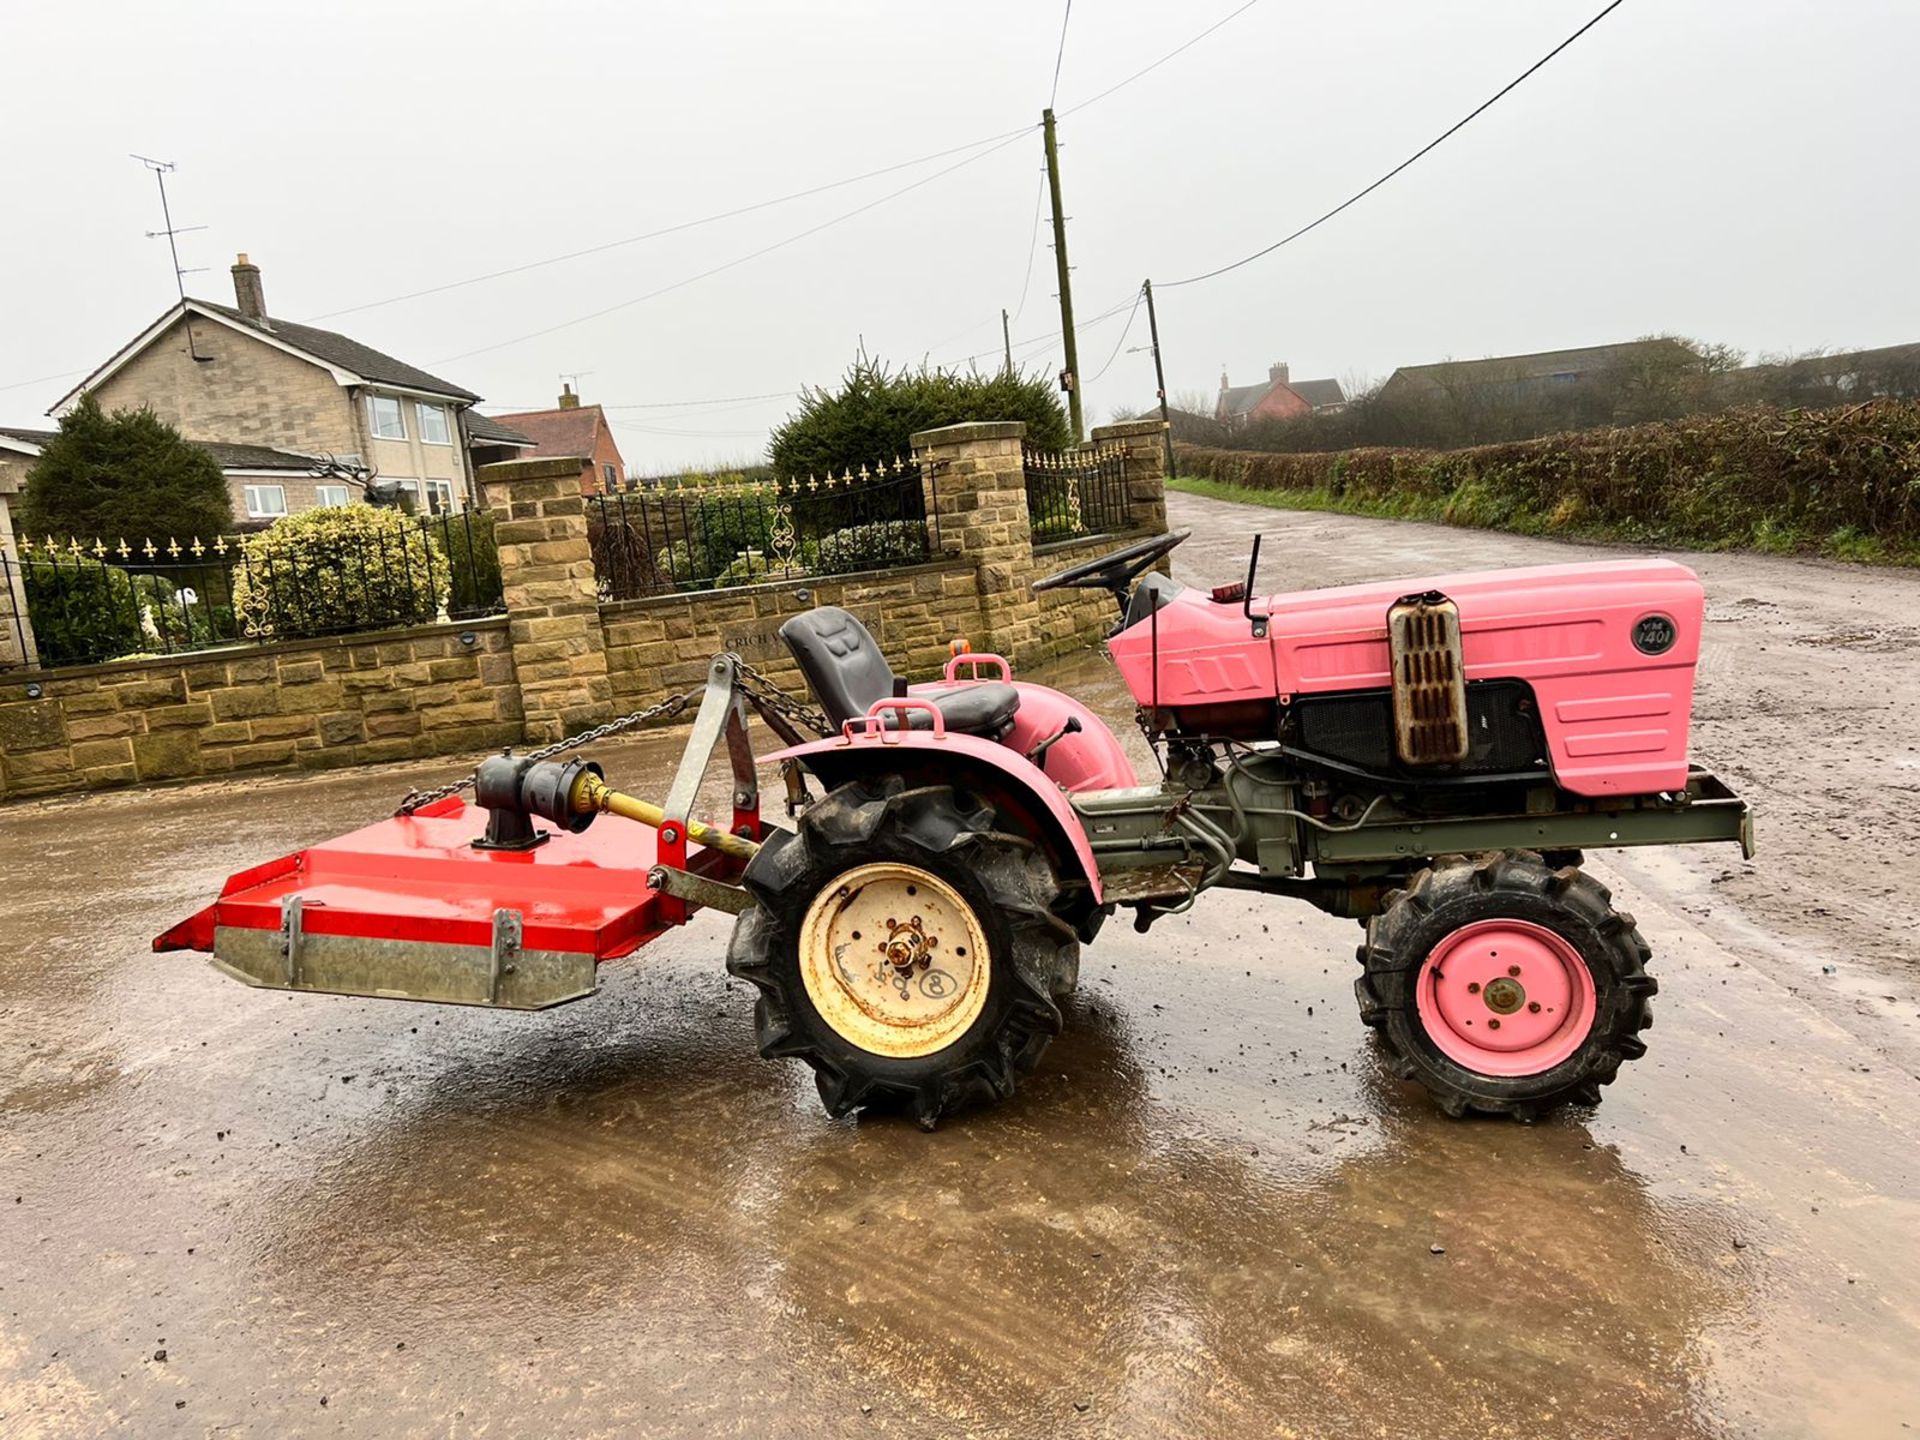 YANMAR YM1401D 14hp 4WD COMPACT TRACTOR WITH 4ft FLEMING TOPPER, RUNS DRIVES AND CUTS *PLUS VAT*